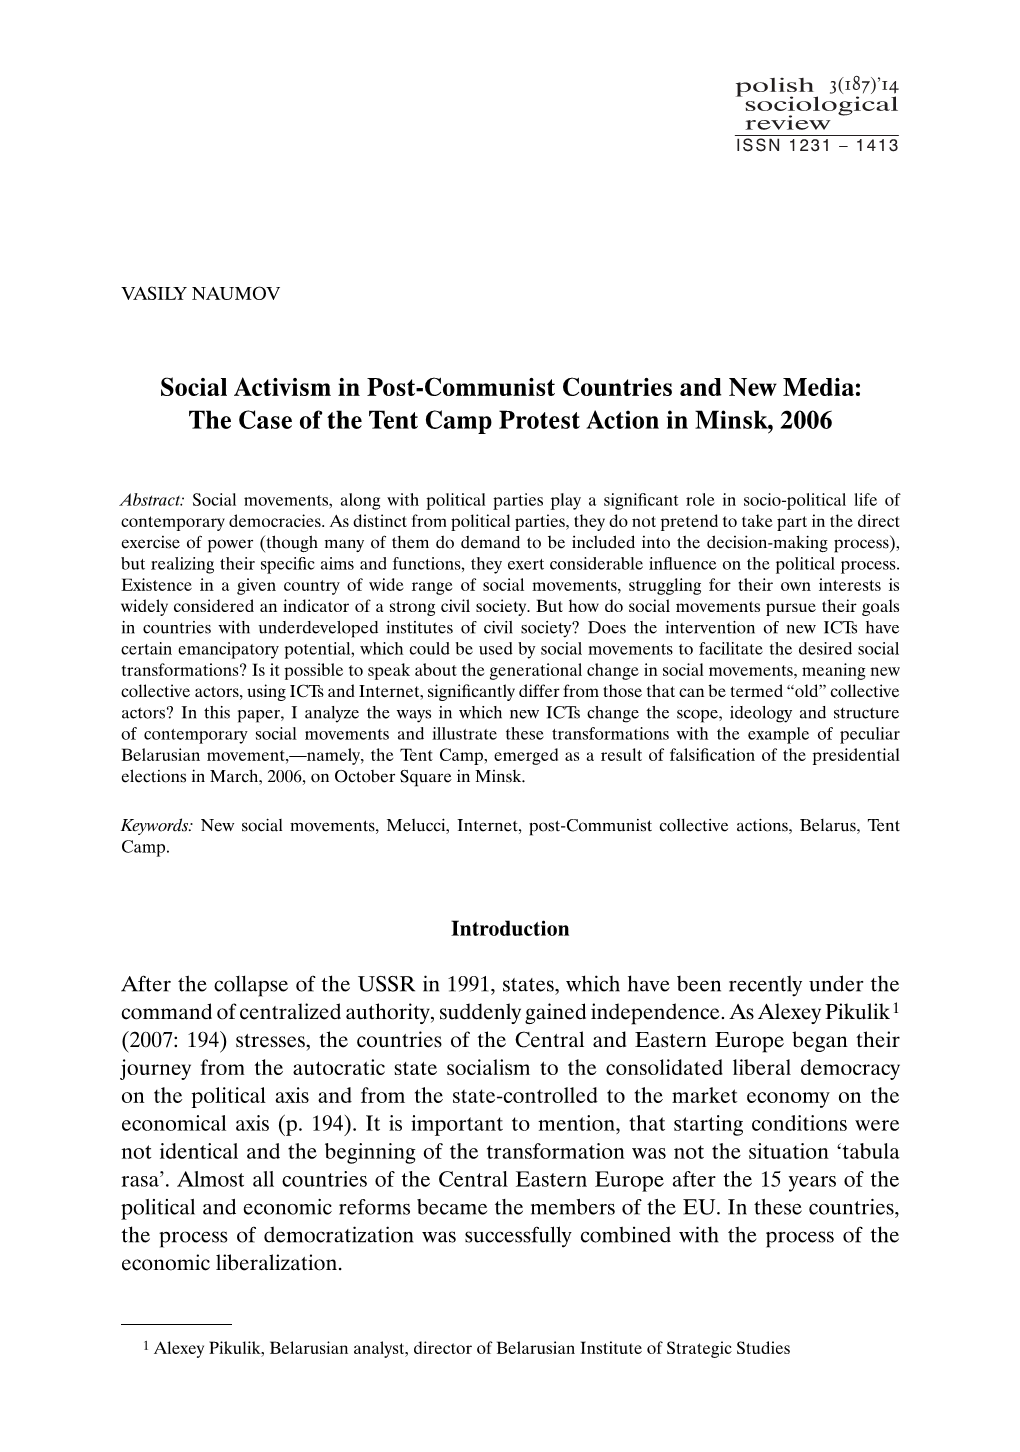 Social Activism in Post-Communist Countries and New Media: the Case of the Tent Camp Protest Action in Minsk, 2006